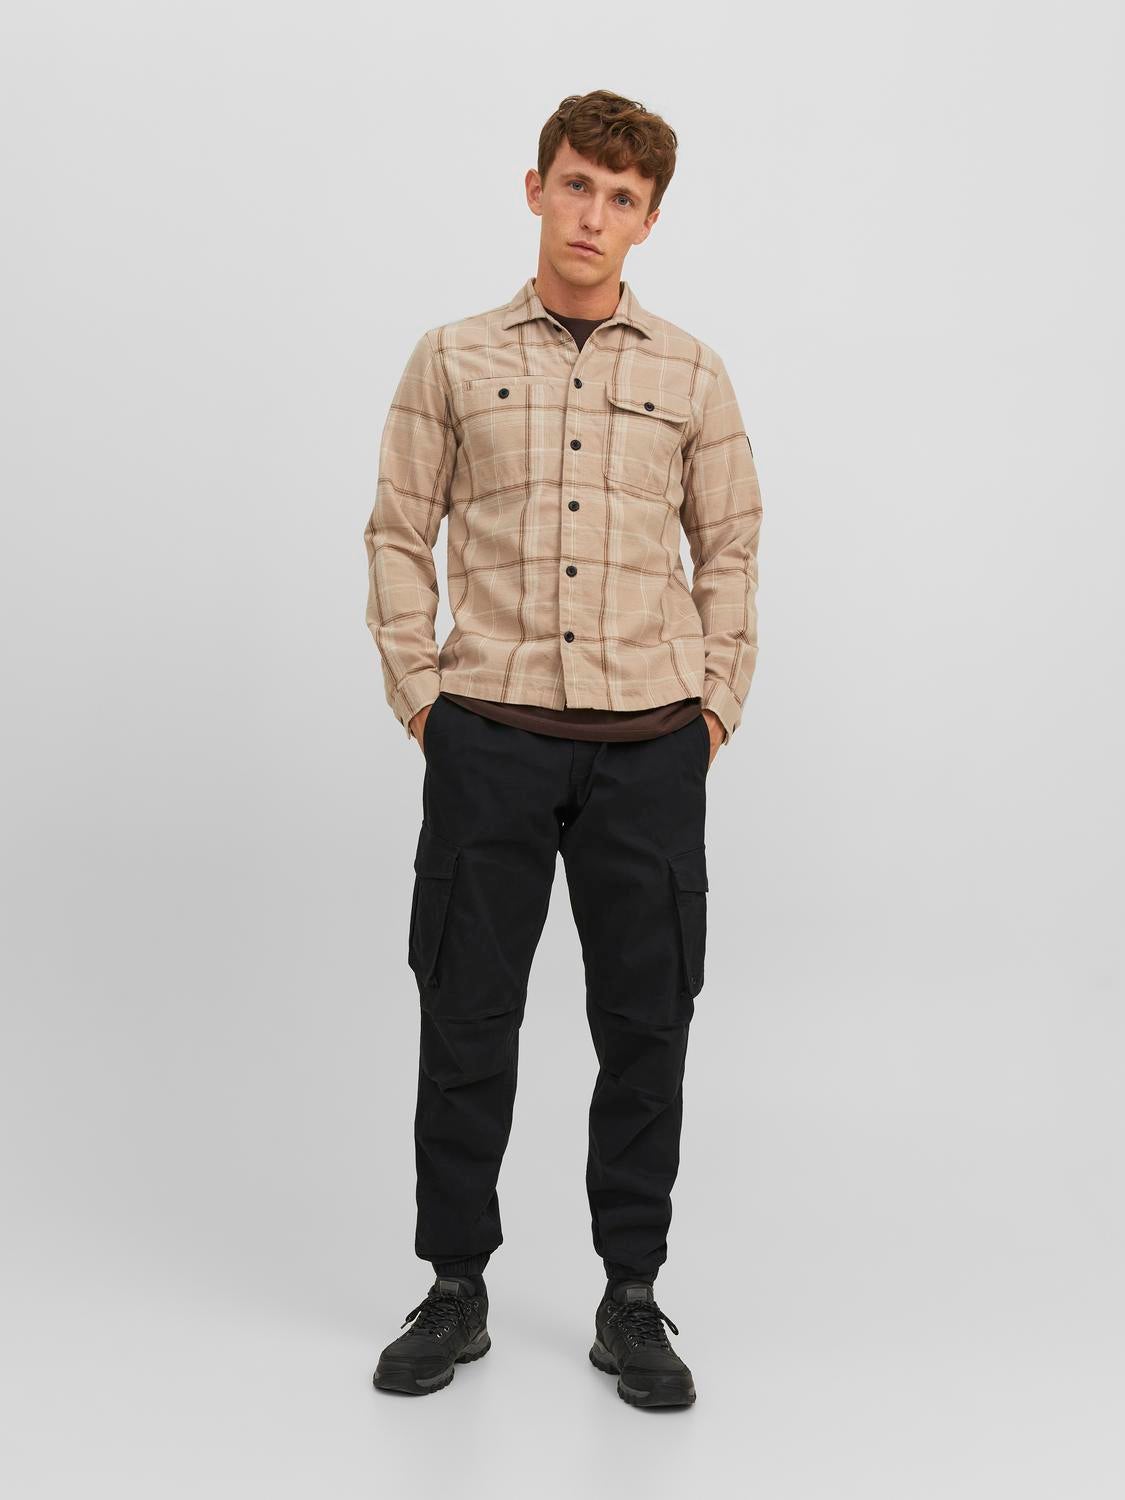 Relaxed Fit trousers Black & | | Cargo Jones® Jack